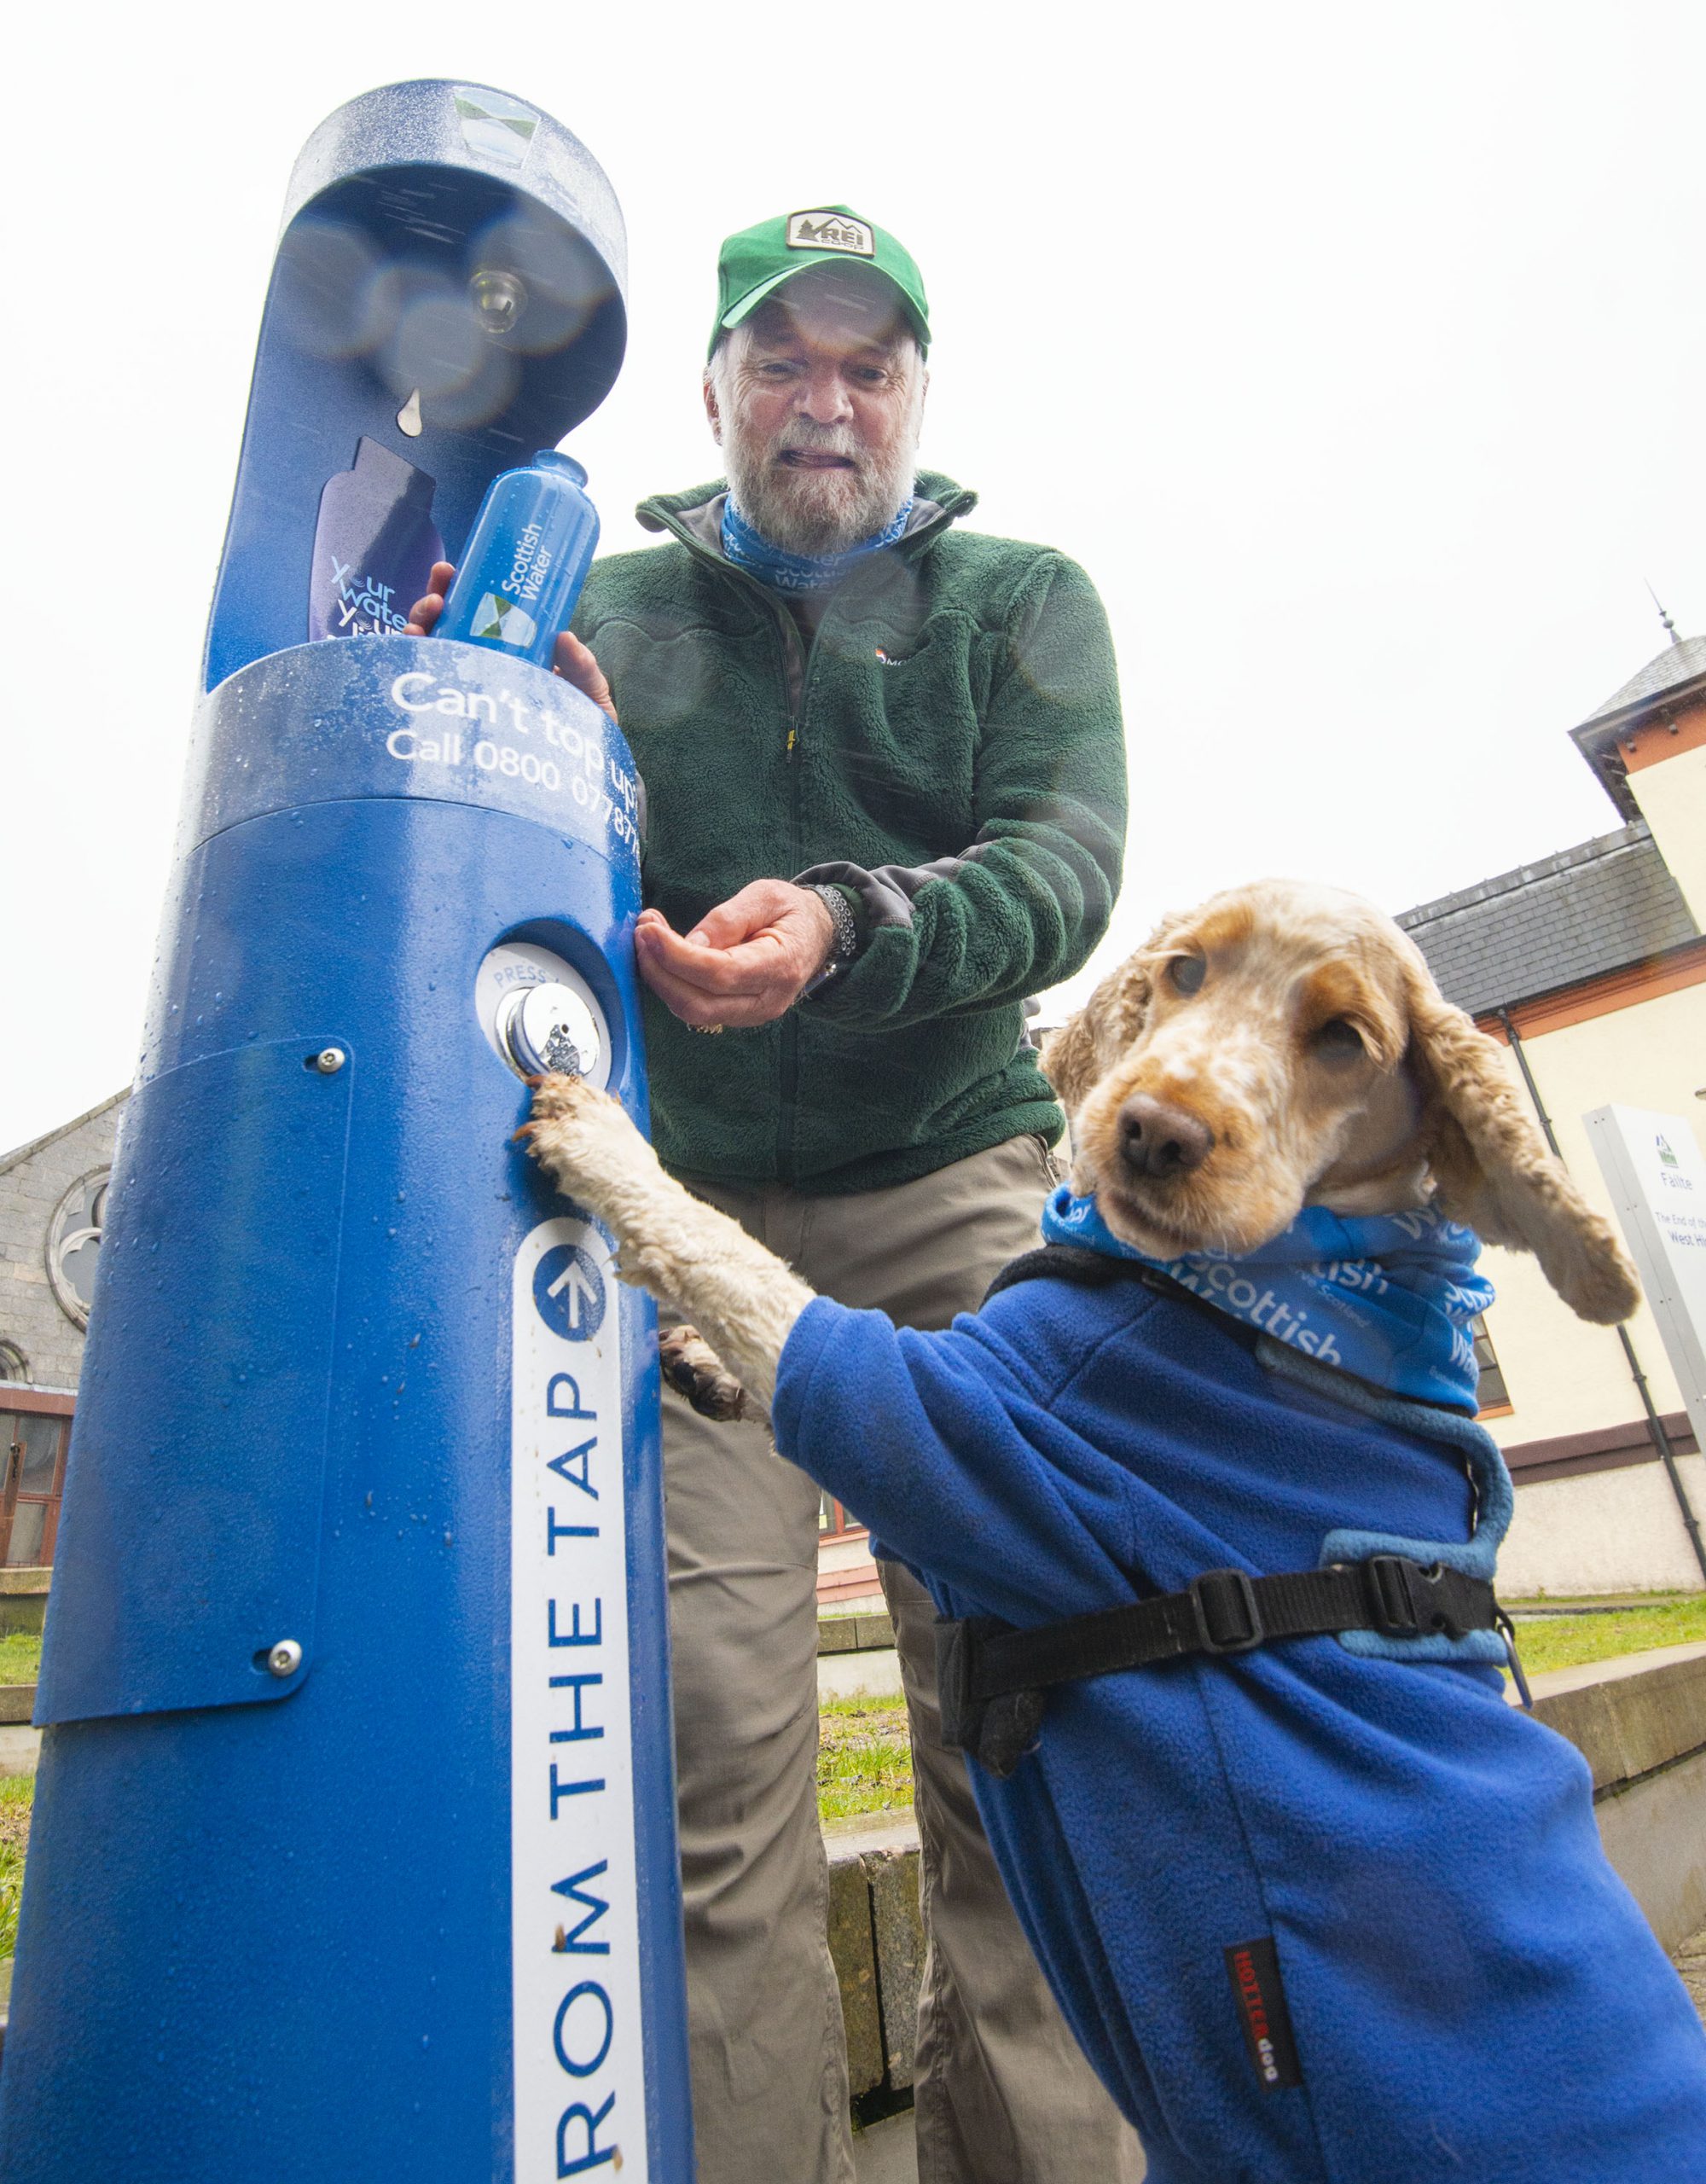 West Highland Way water taps keep walkers hydrated as adventurer Cameron McNeish unveils two new high tech water Top up Taps